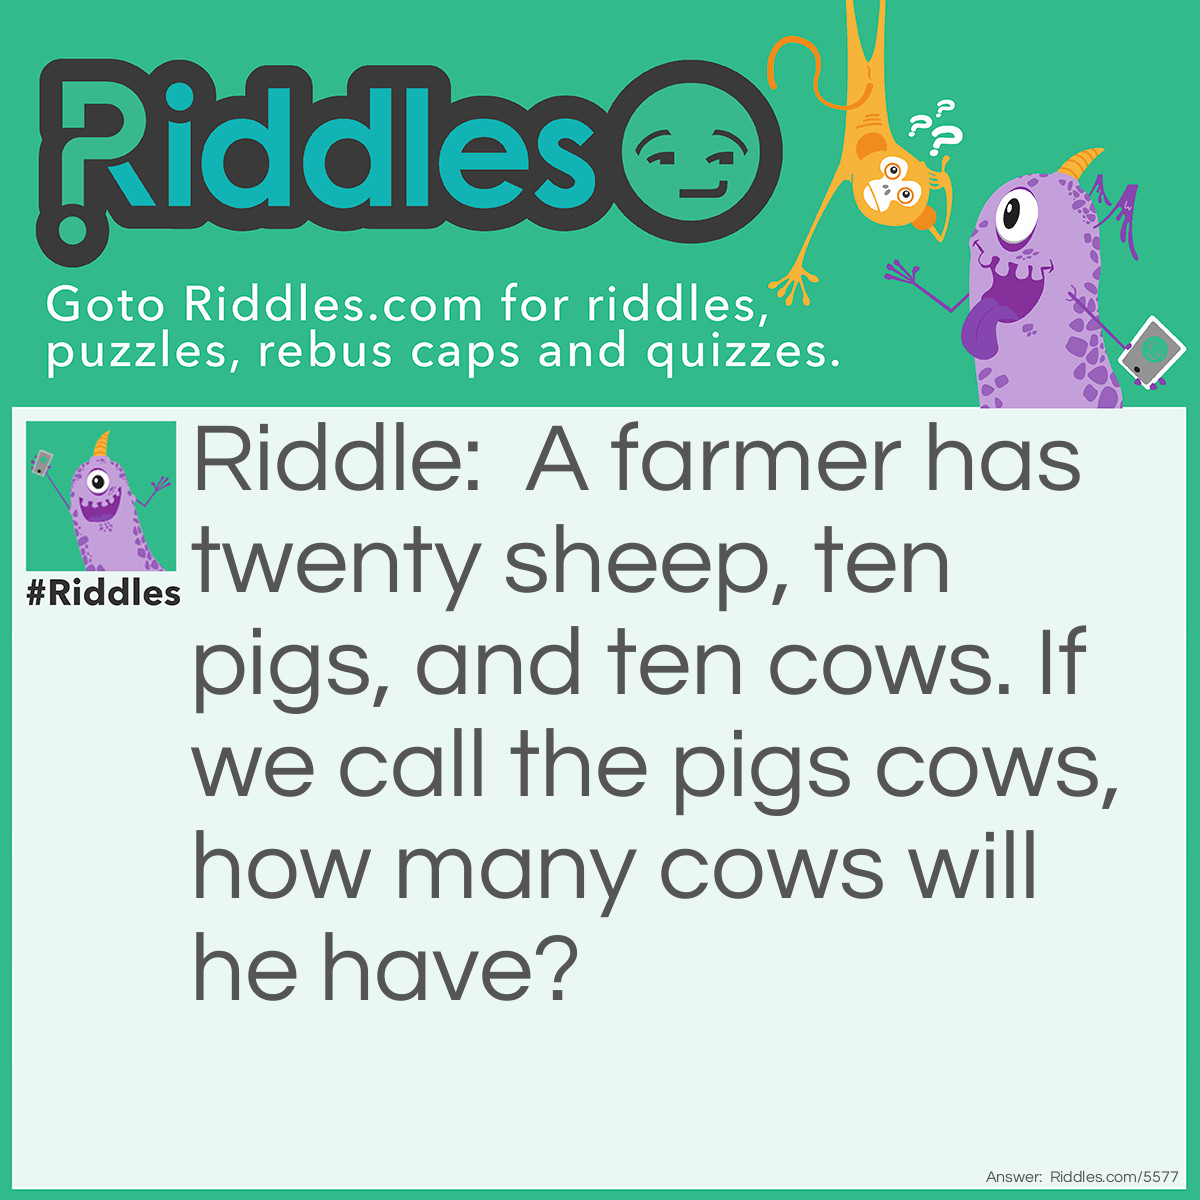 Riddle: A farmer has twenty sheep, ten pigs, and ten cows. If we call the pigs cows, how many cows will he have? Answer: Ten Cows. We can call the pigs cows but it doesn't make them cows.